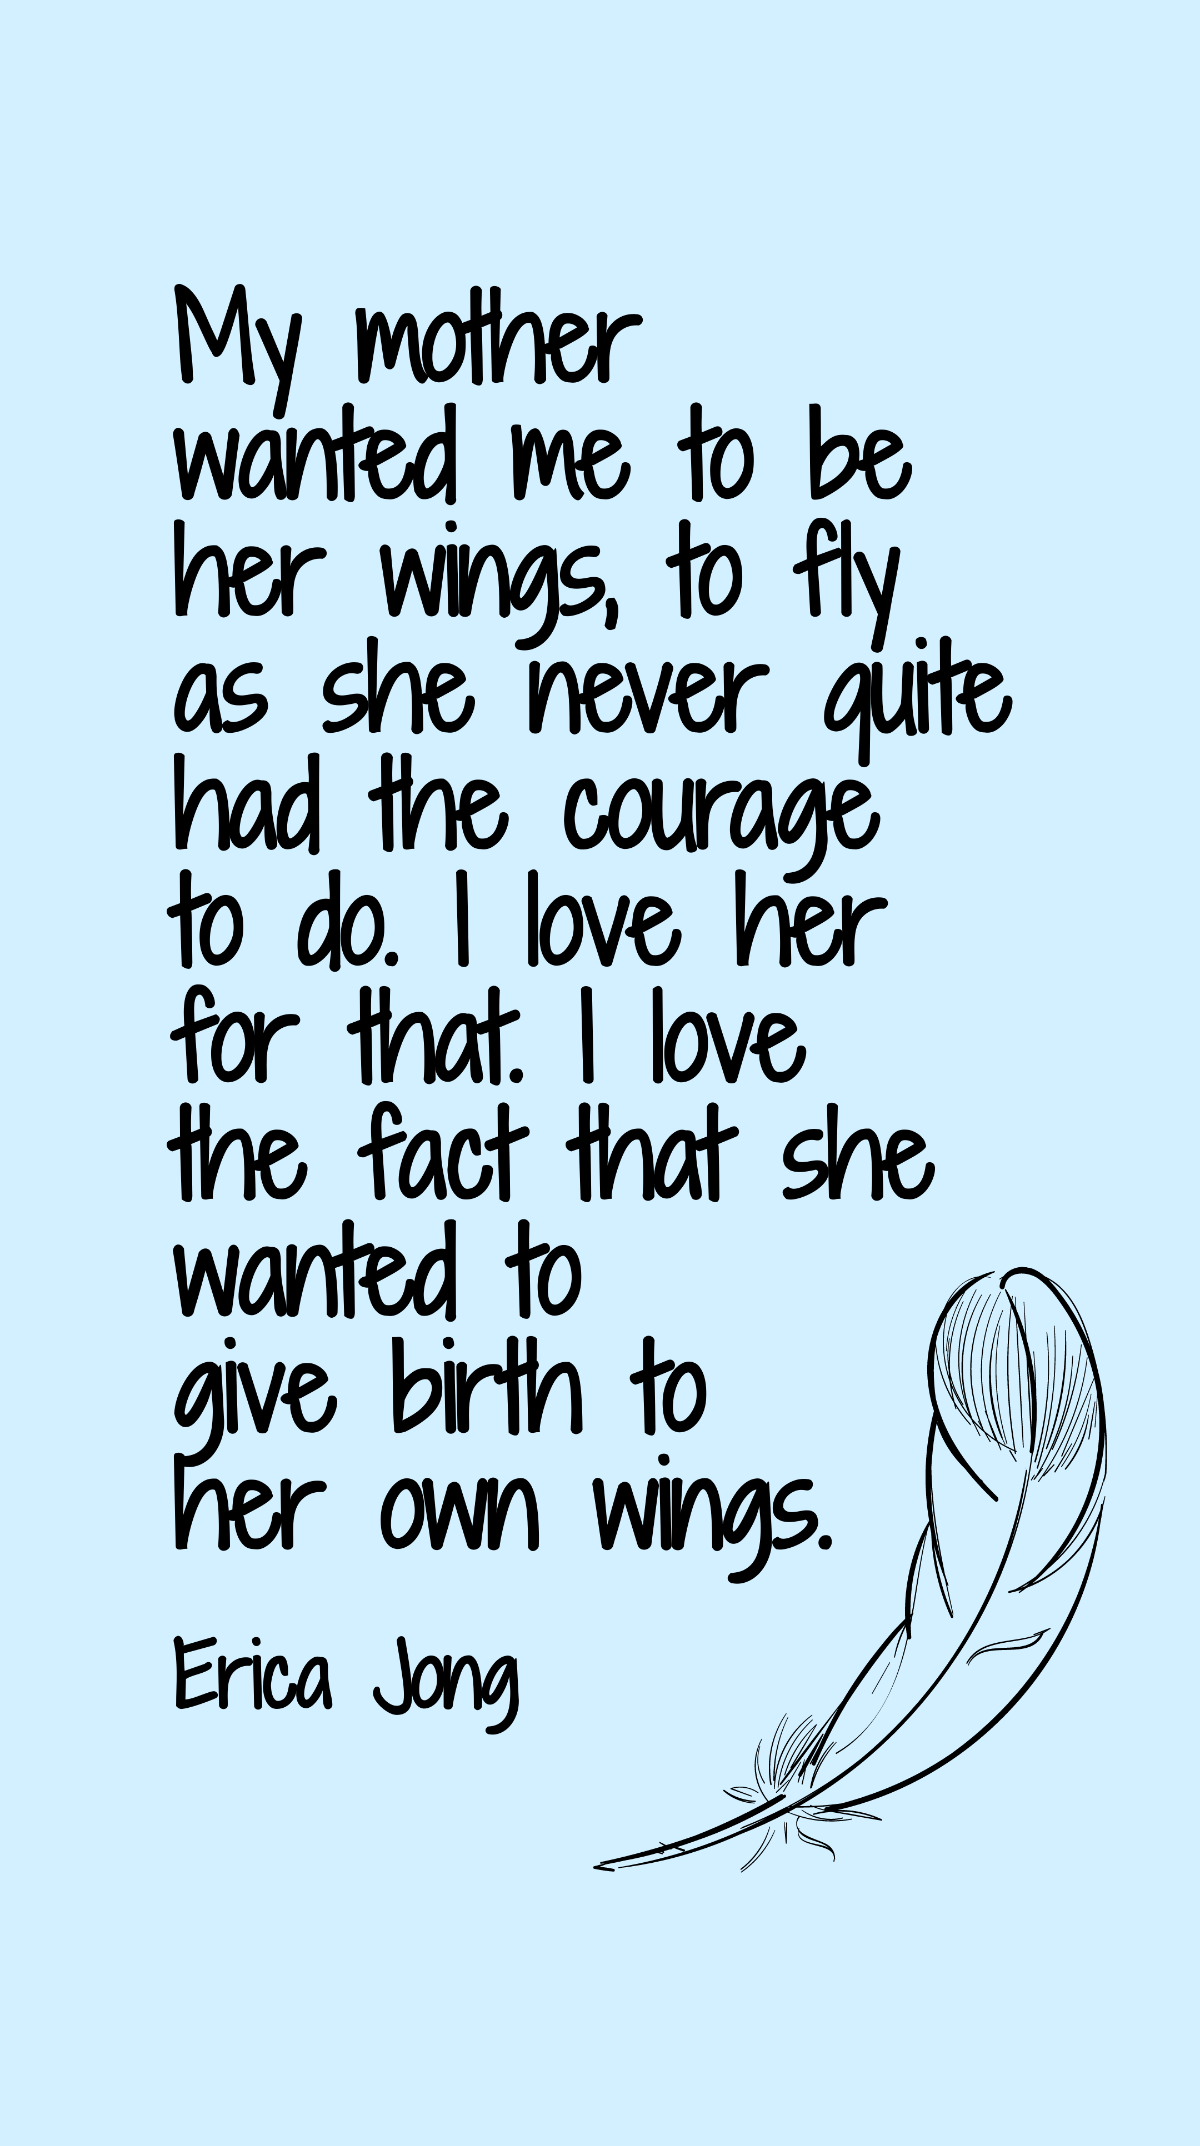 Free Erica Jong - My mother wanted me to be her wings, to fly as she never quite had the courage to do. I love her for that. I love the fact that she wanted to give birth to her own wings. Template